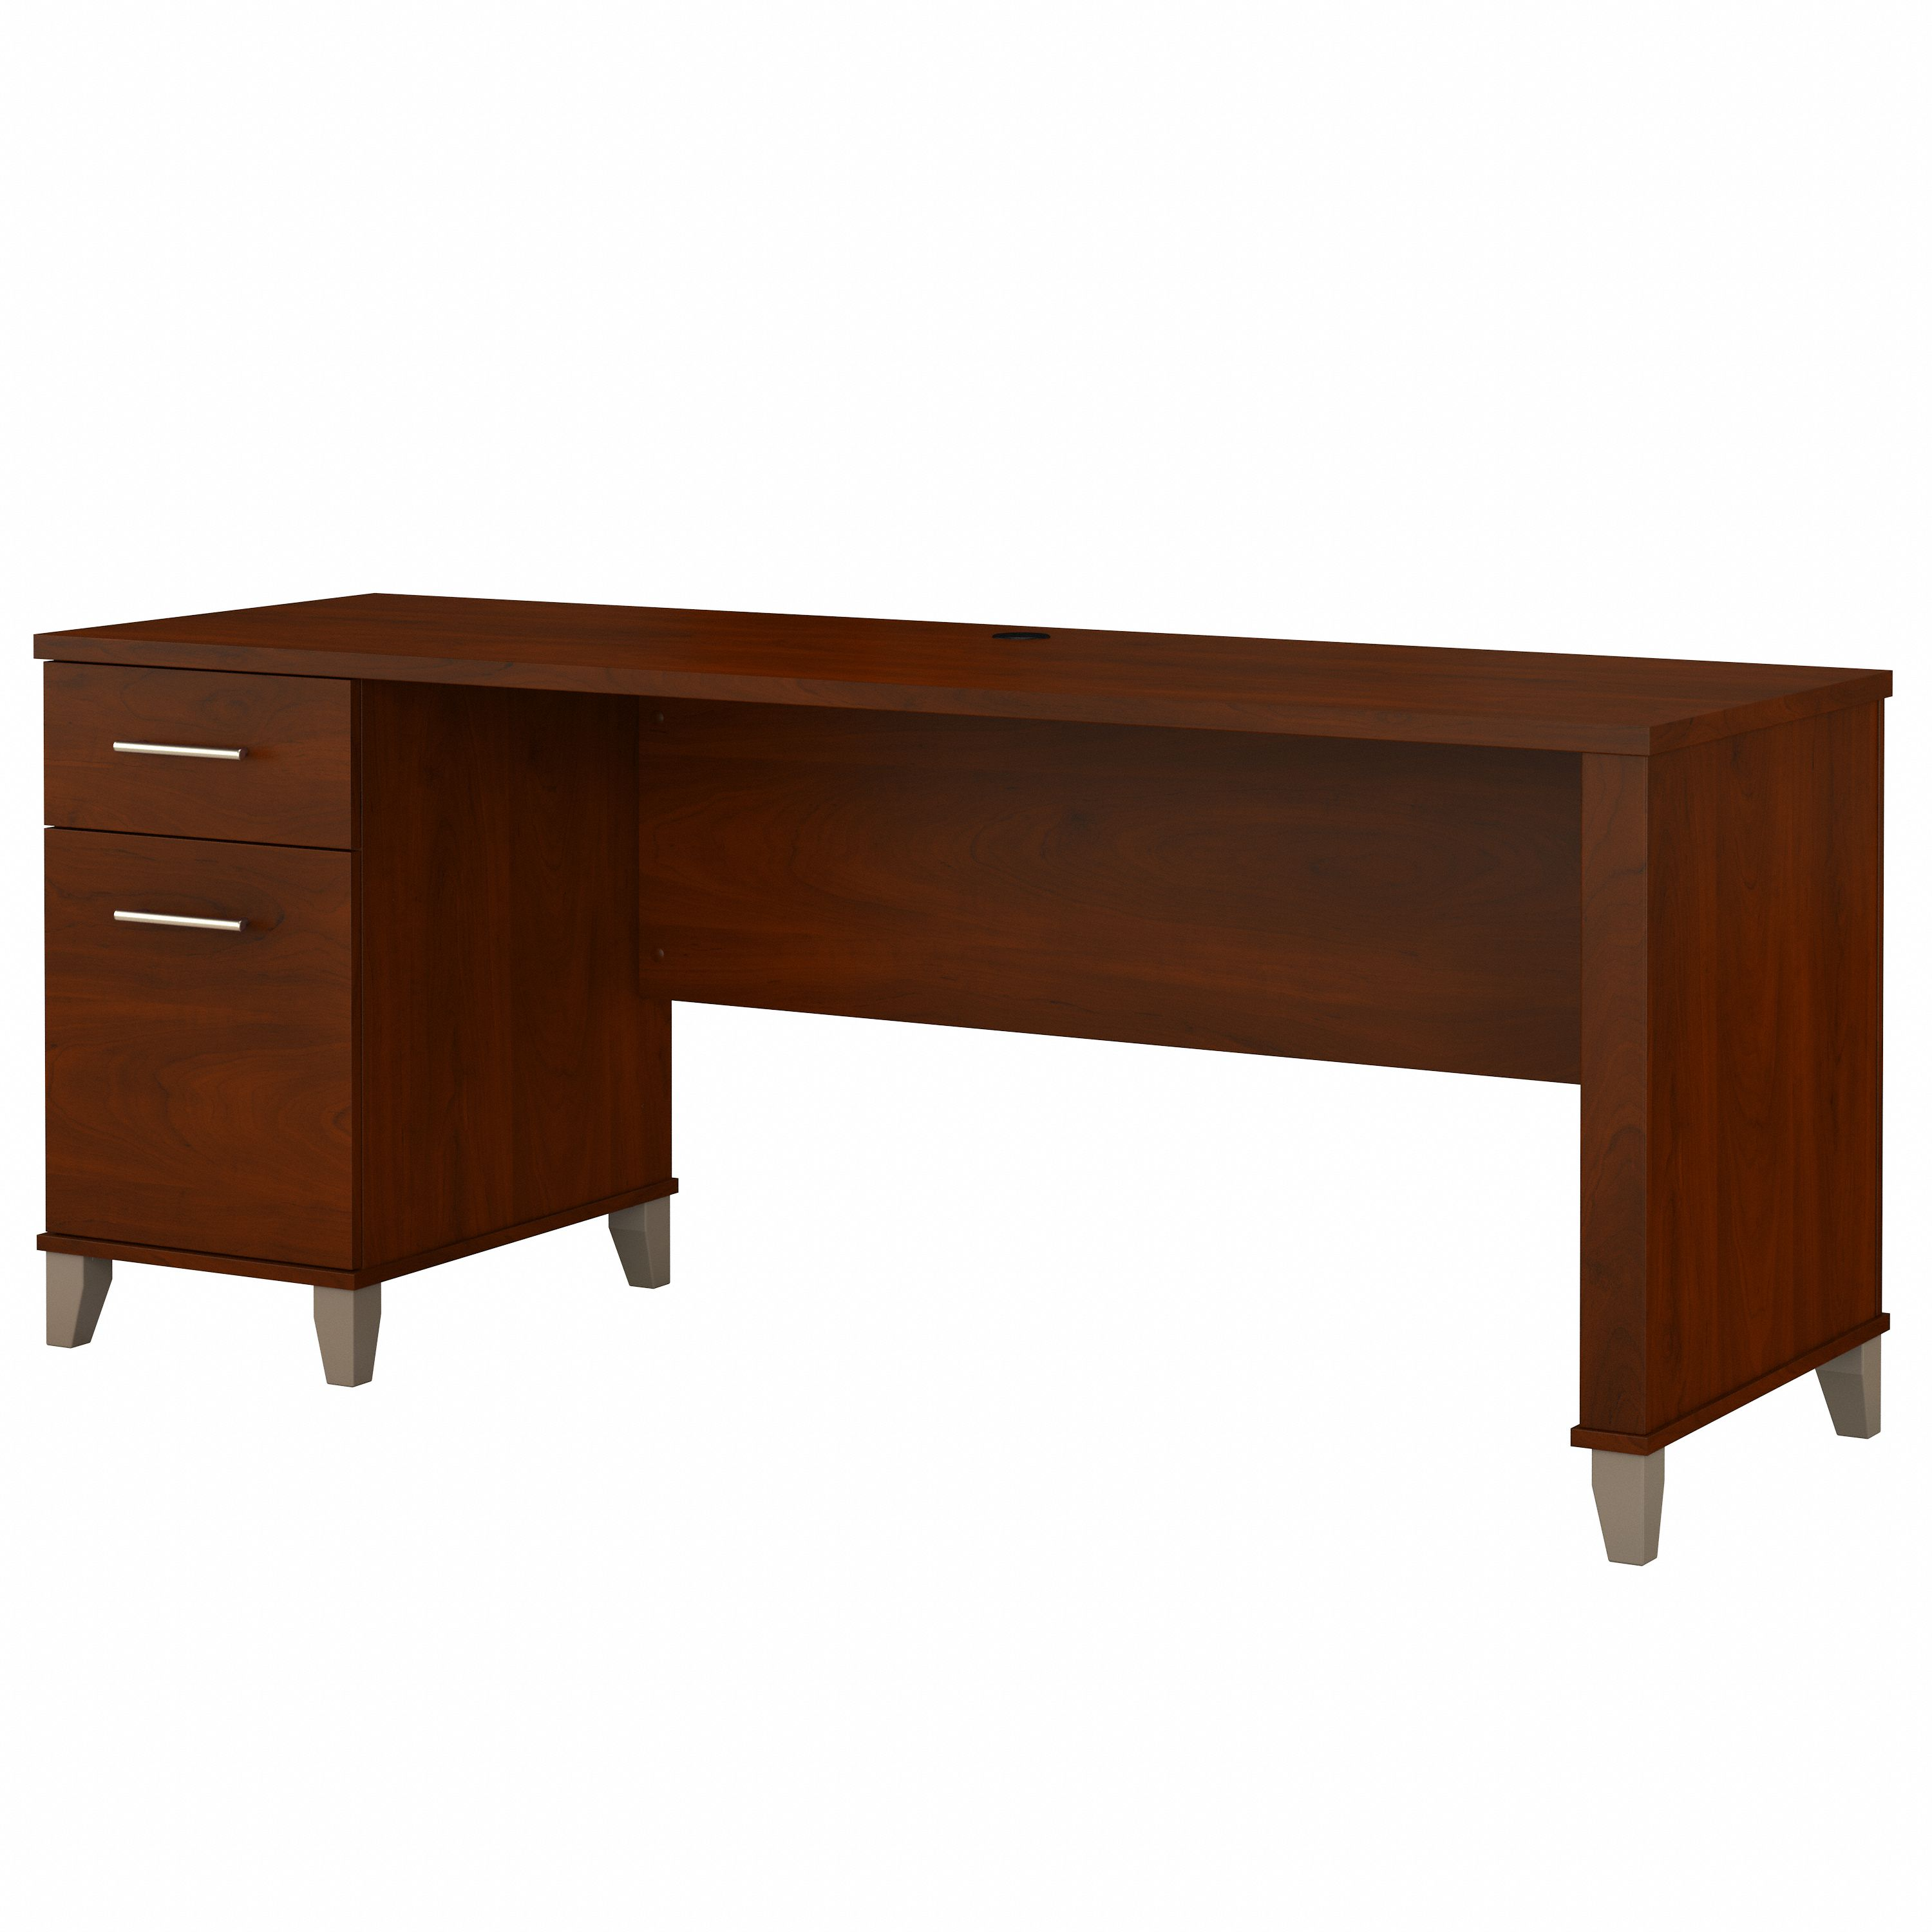 Shop Bush Furniture Somerset 72W Office Desk with Drawers 02 WC81772 #color_hansen cherry